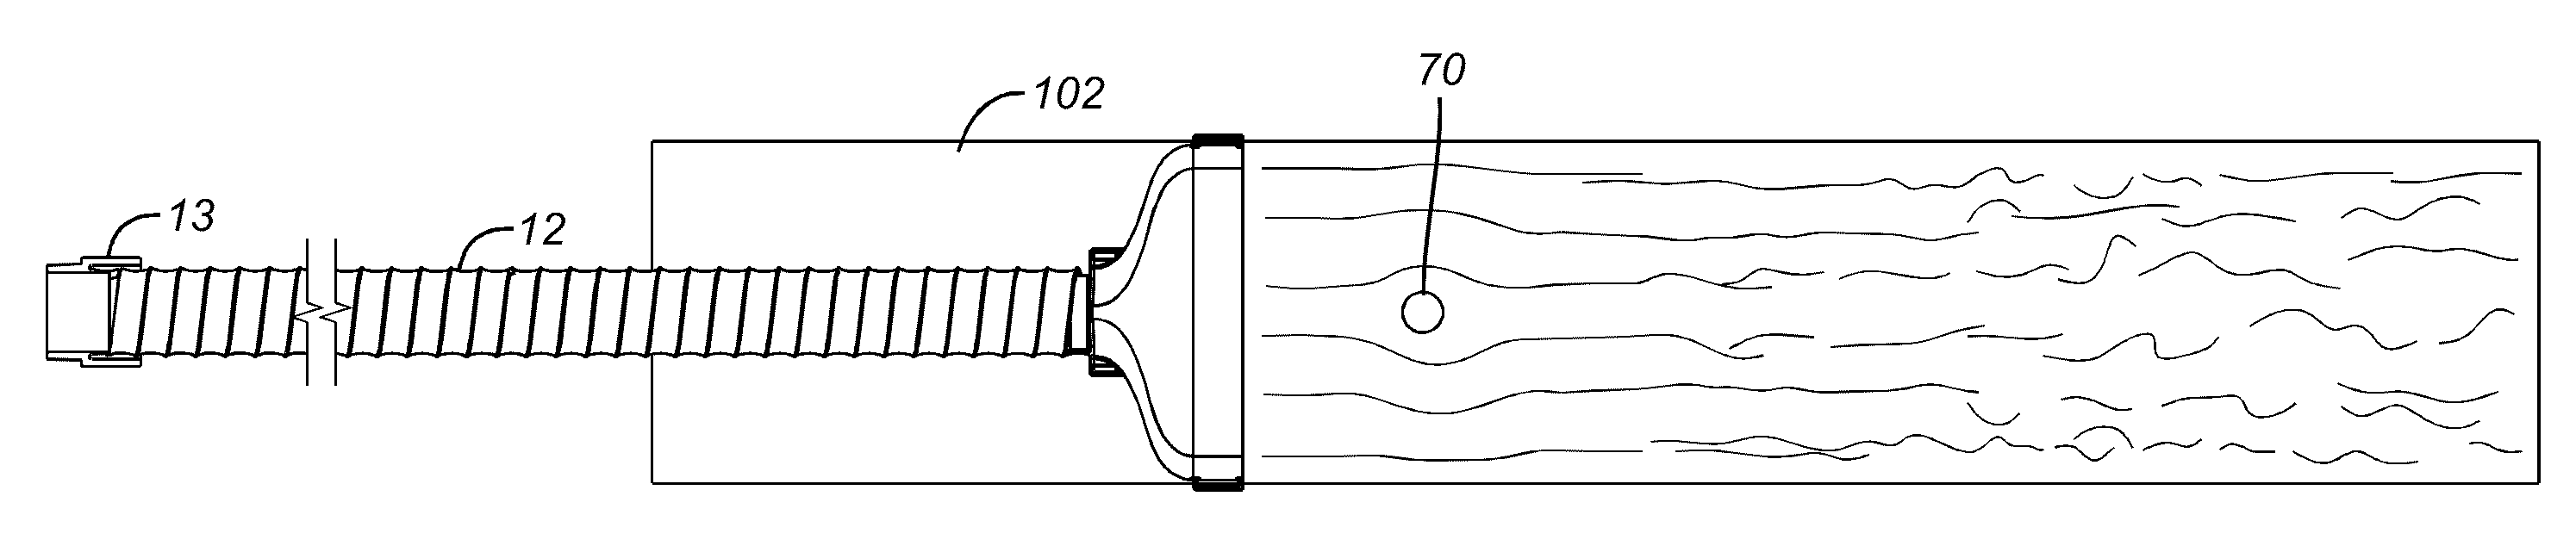 Apparatus and Method for Reducing Contamination of Surgical Sites